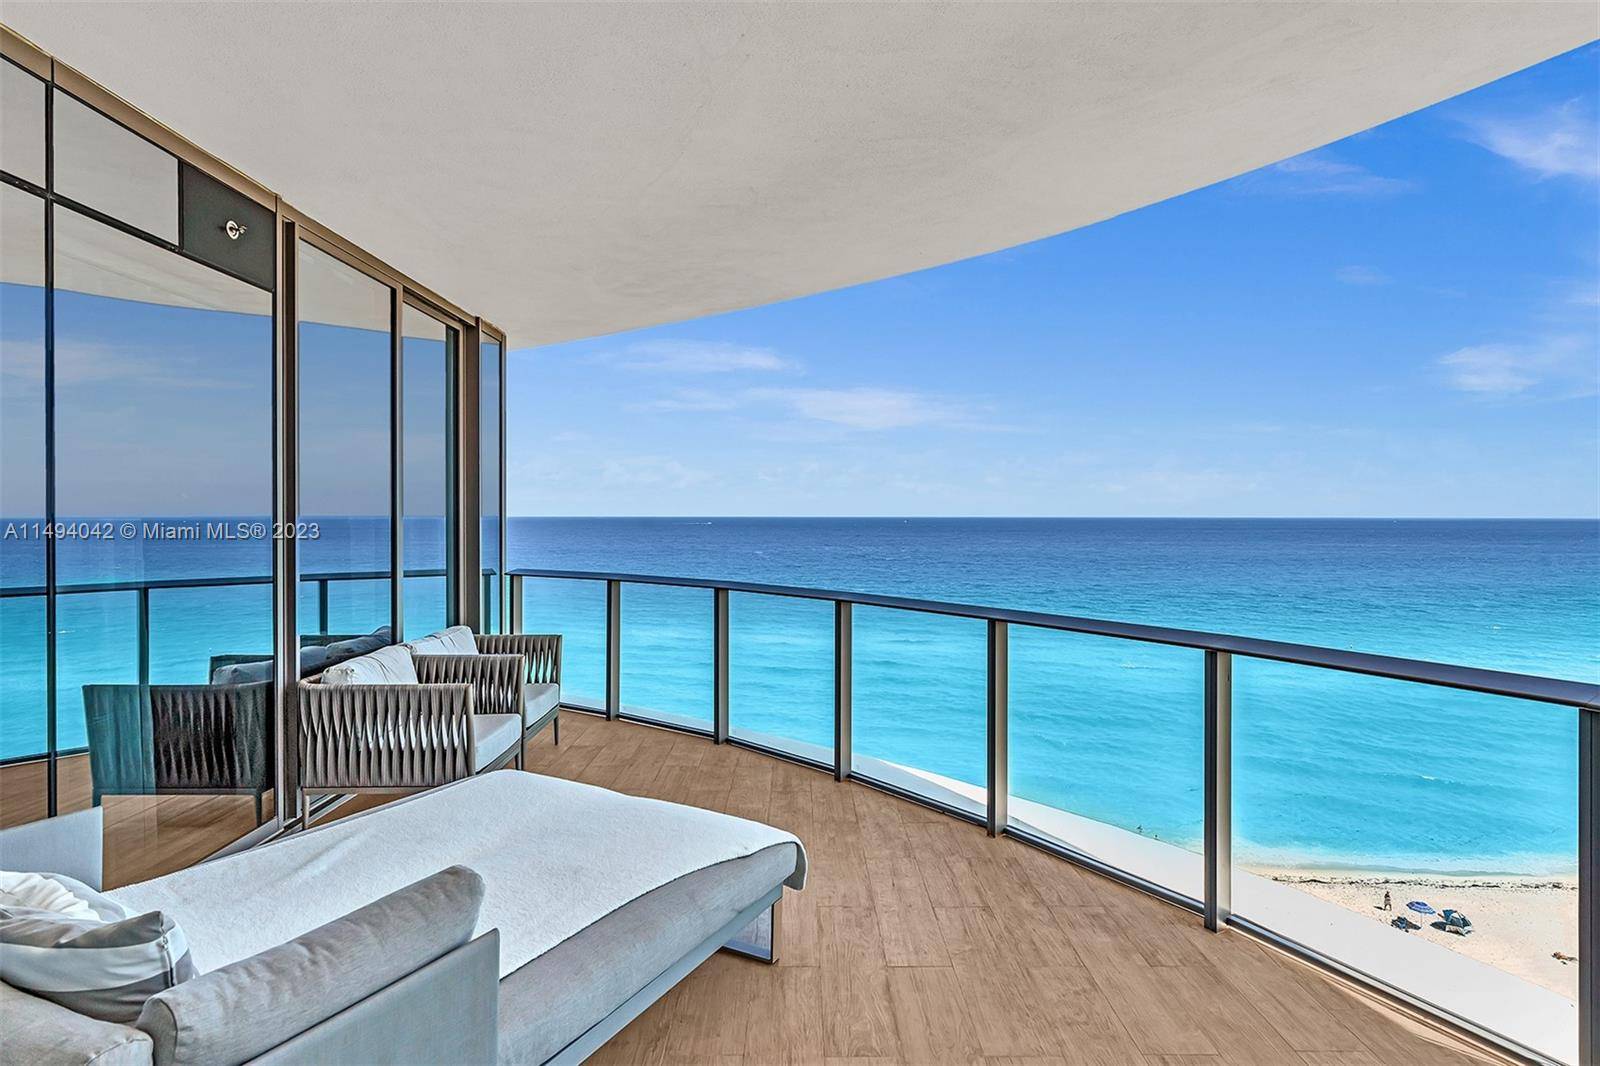 300 unobstructed views including the Atlantic Ocean, Intracoastal, Bay, and Miami Skyline.